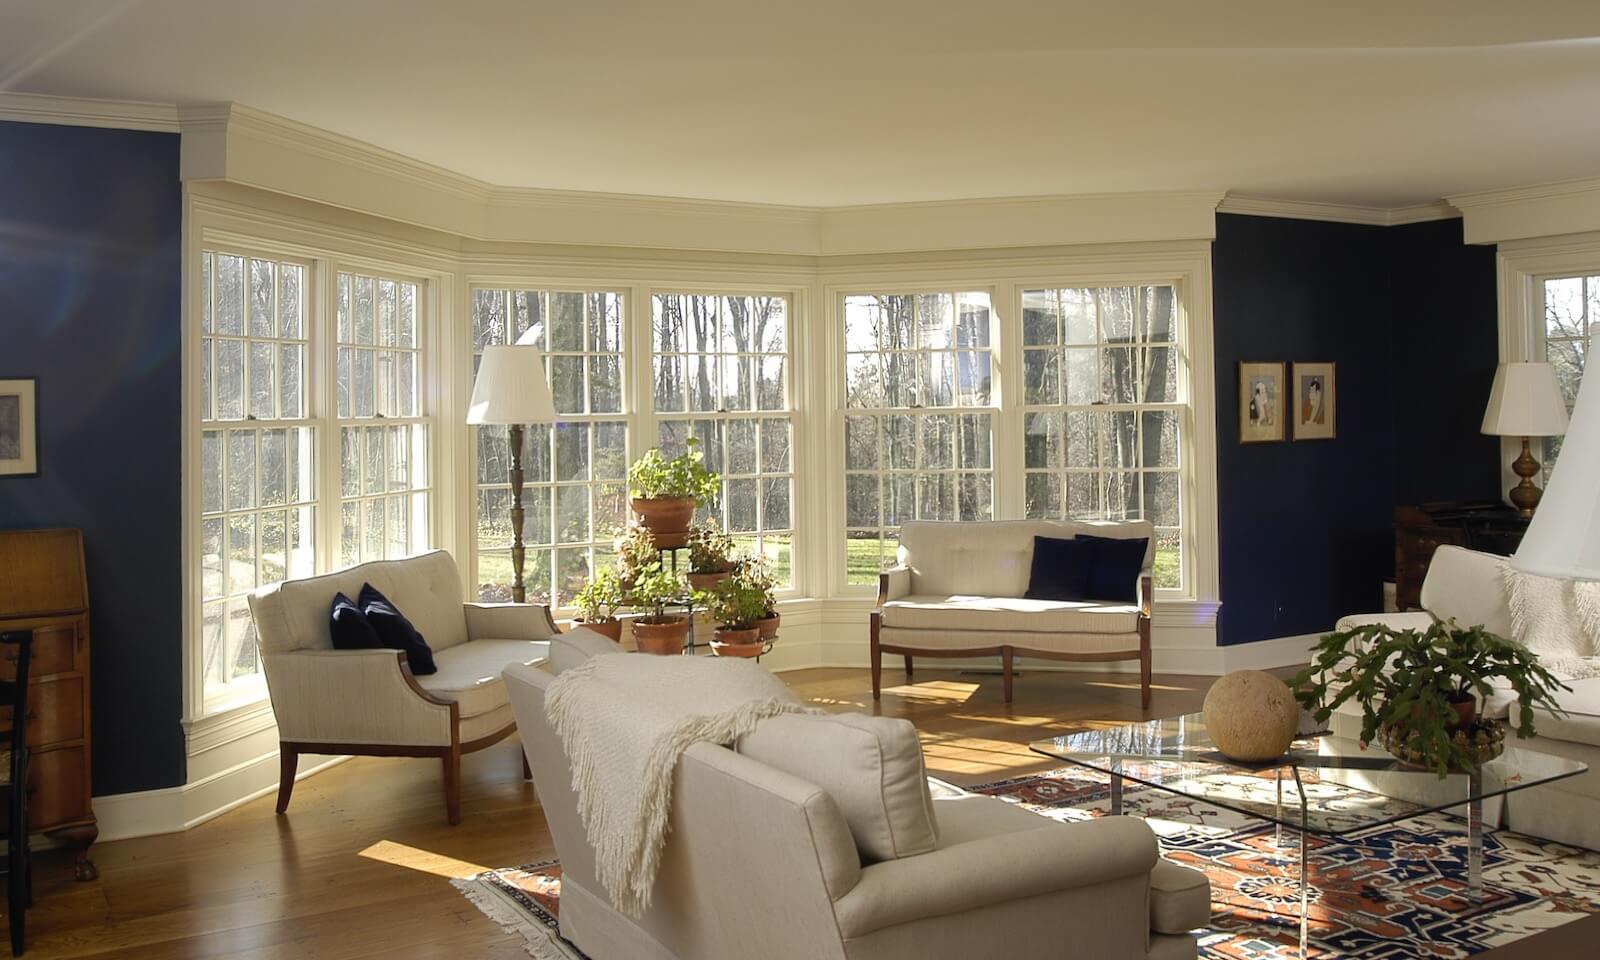 Interior view of angled bay windows of living room designed by MA architect and builder